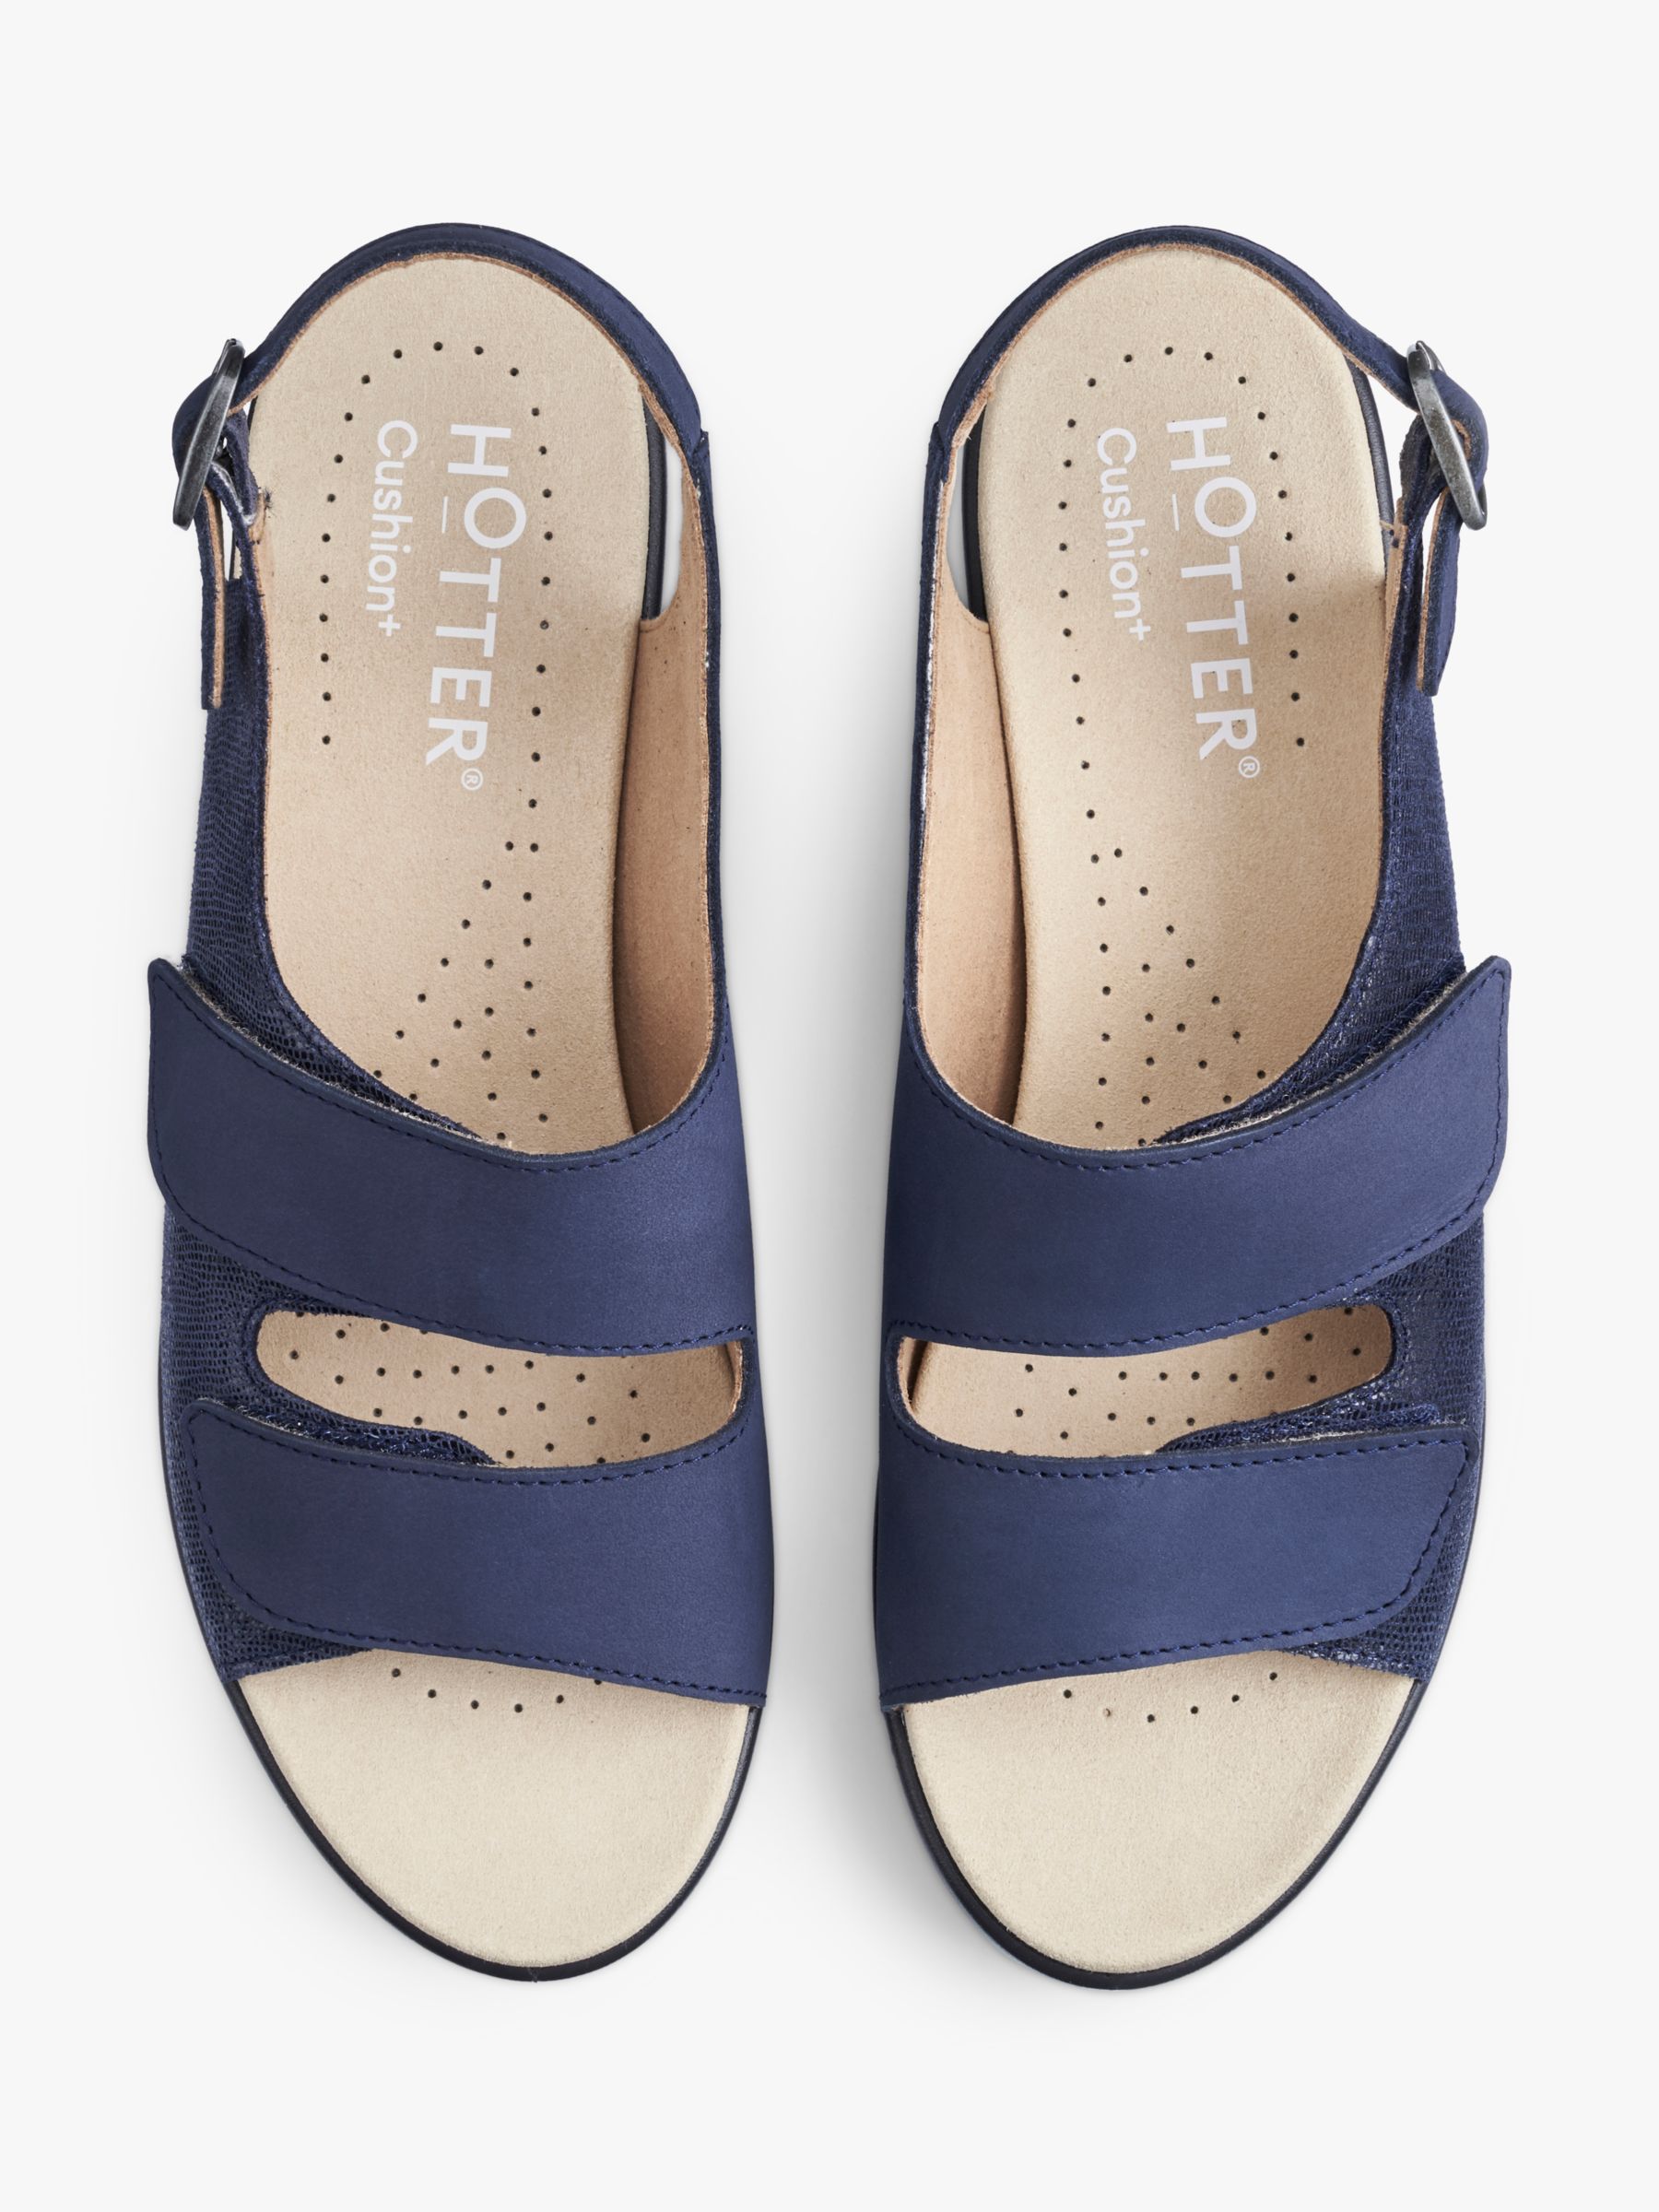 Buy Hotter Easy II Extra Wide Fit Faux Lizard Leather Low Wedge Sandals, Denim Navy Online at johnlewis.com